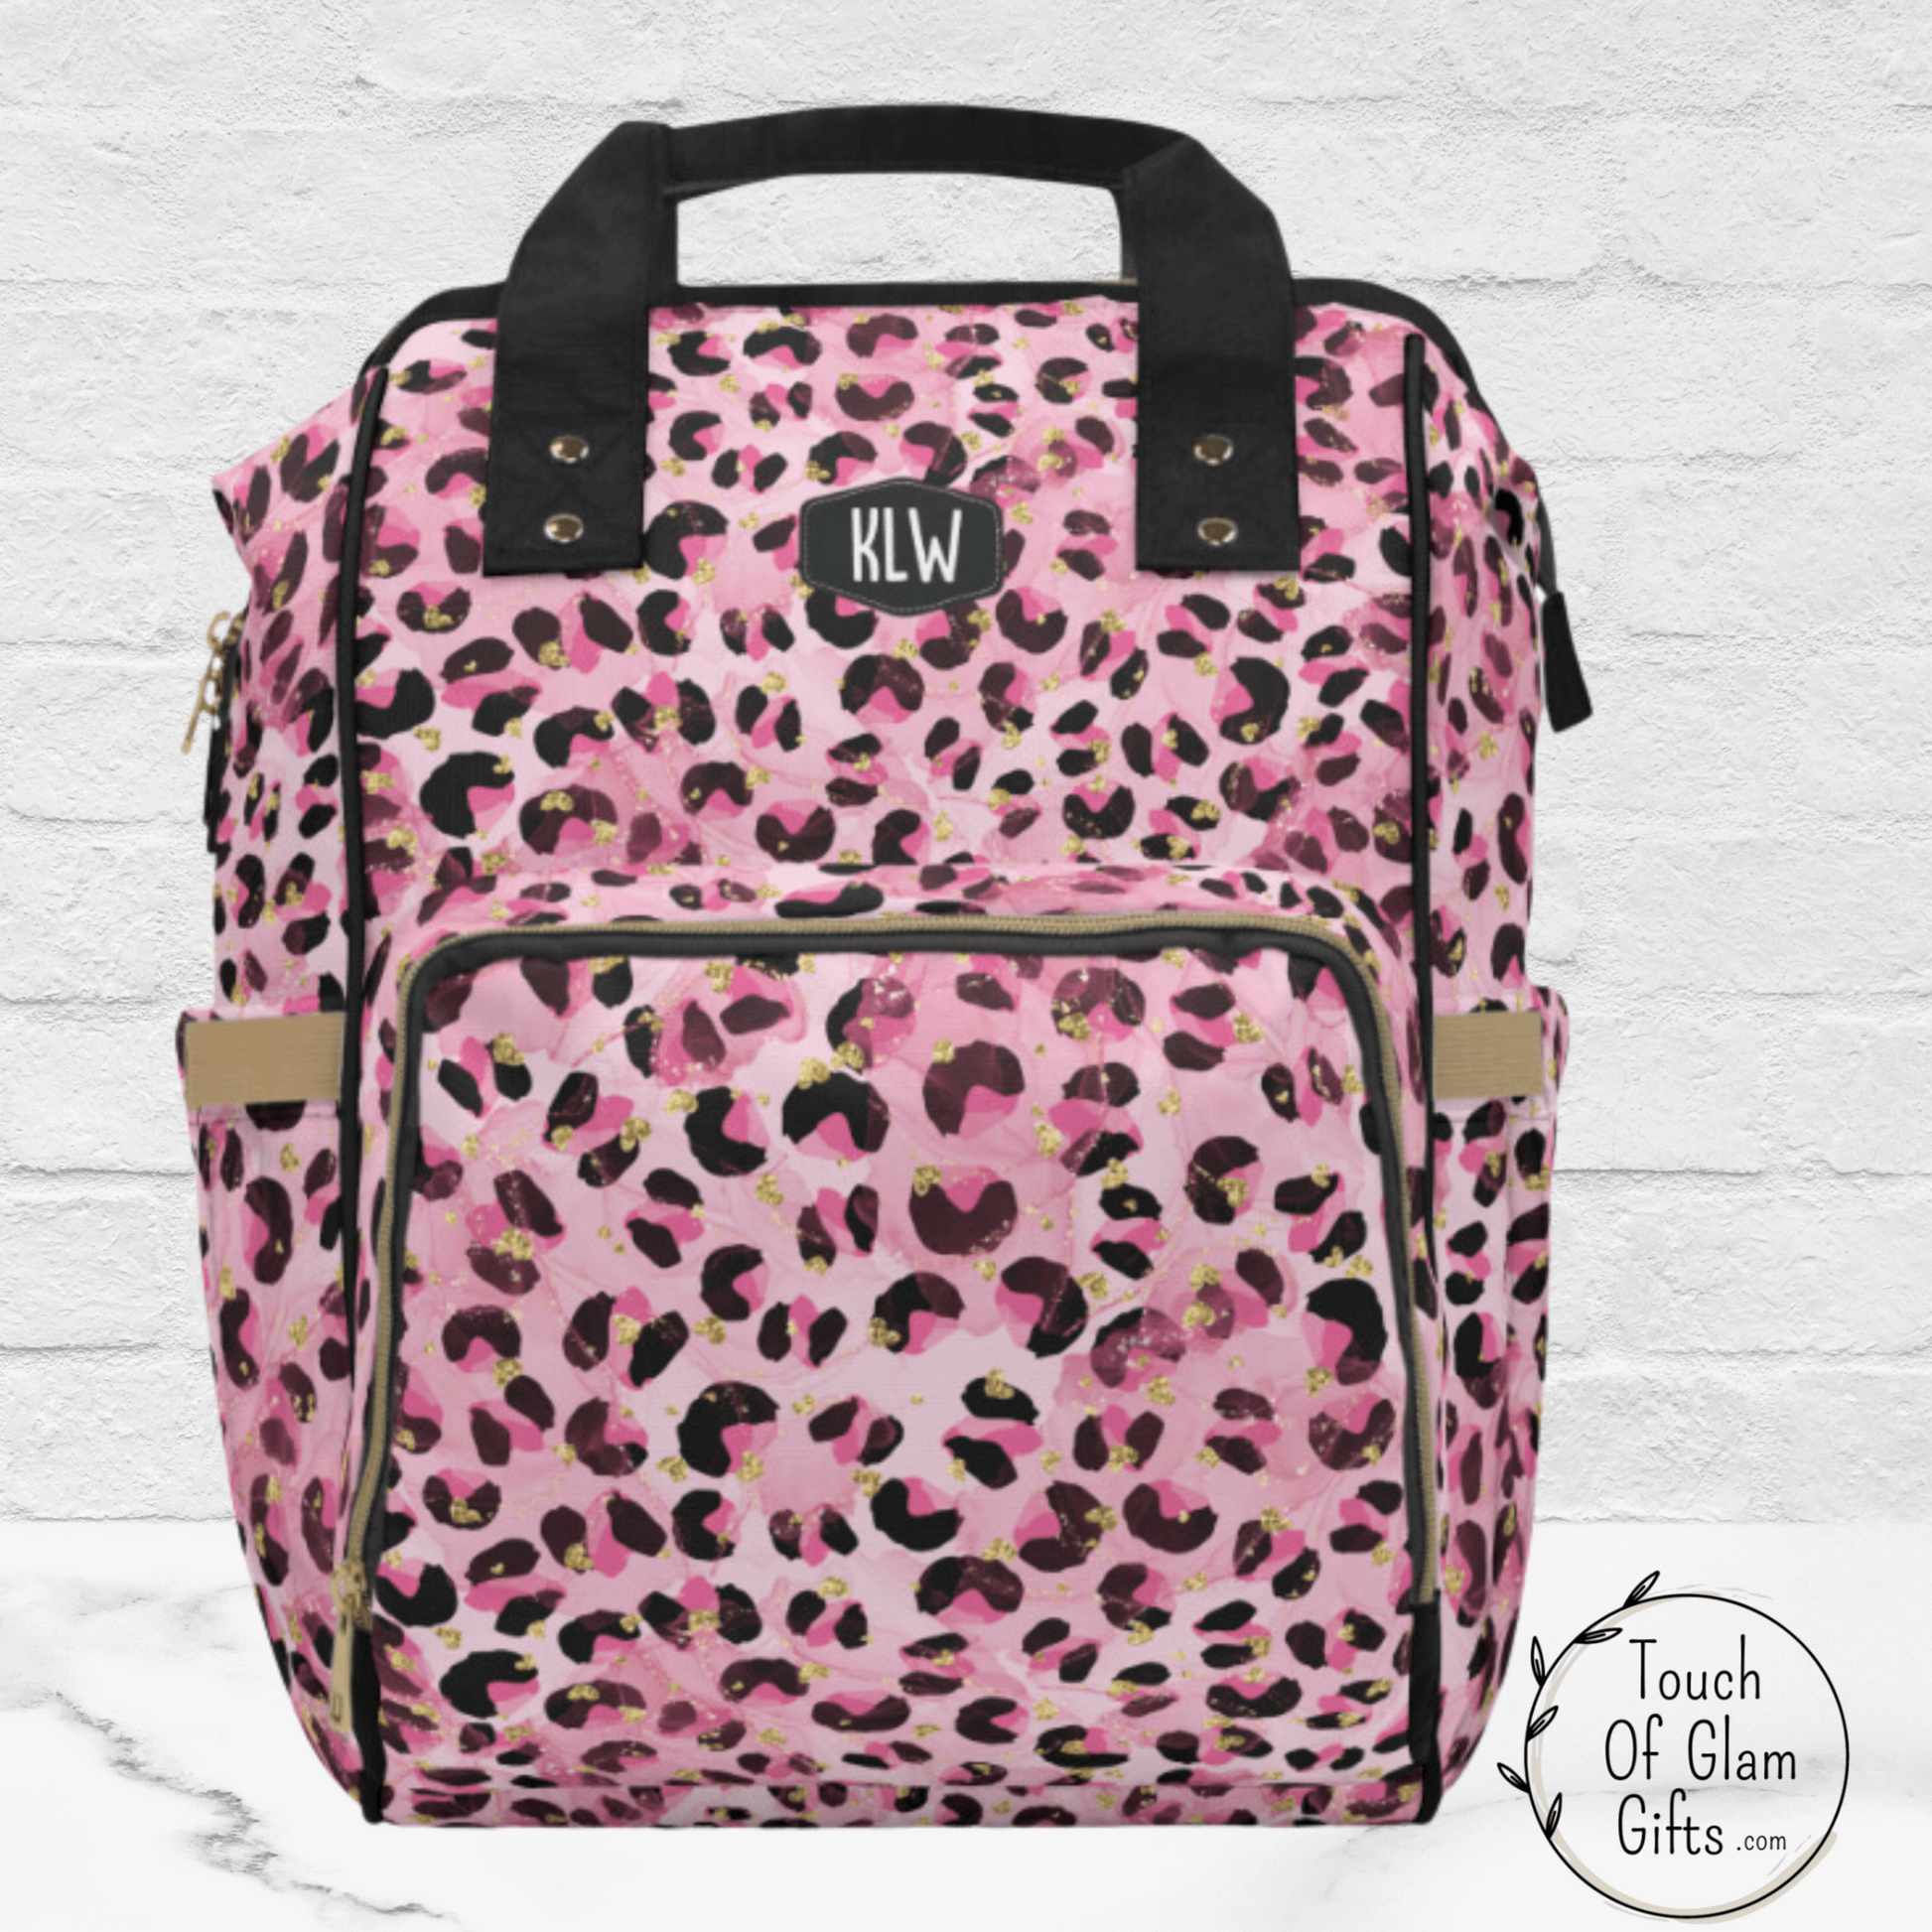 Our pink leopard print diaper bag backpack makes the perfect gift for mom or pink lovers.